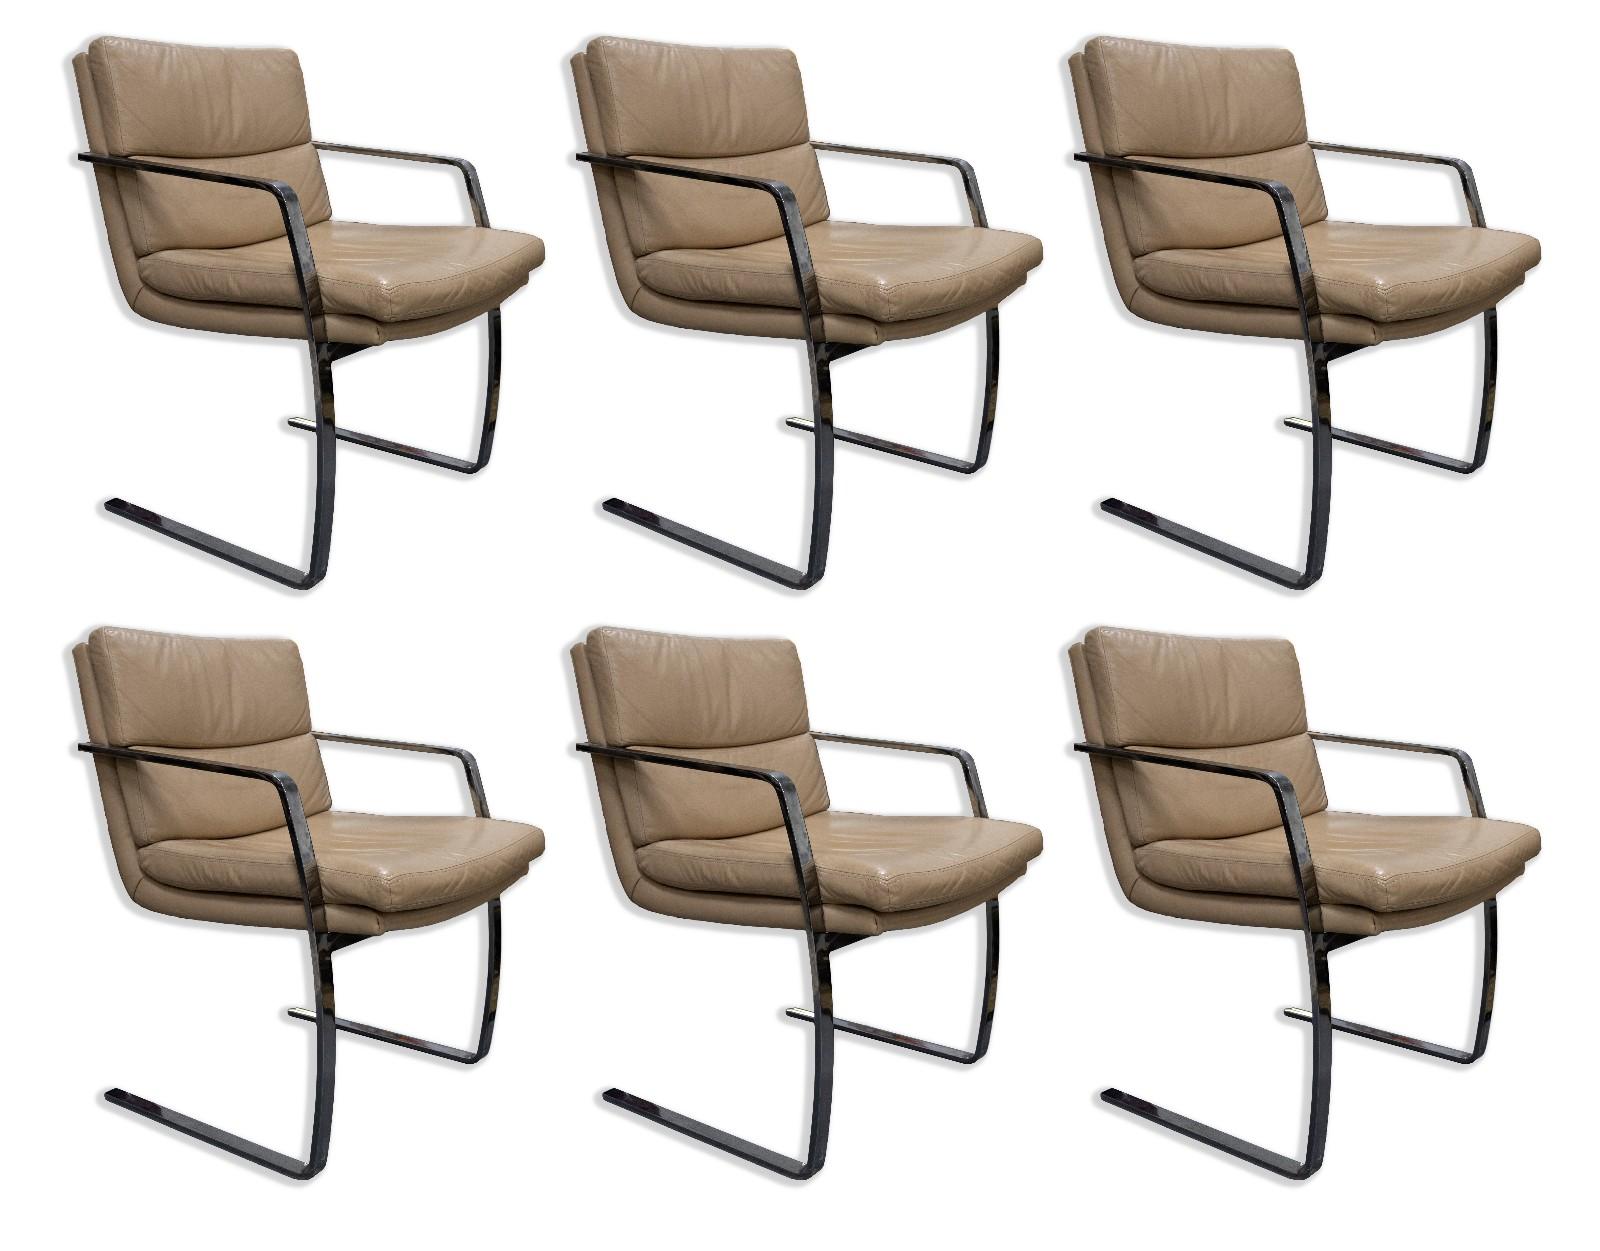 This set of six Milo Baughman Brown Leather and Chrome Cantilever Chairs is a true mid-century modern masterpiece. The combination of sumptuous brown leather upholstery and sleek chrome cantilever frames creates a striking visual contrast that